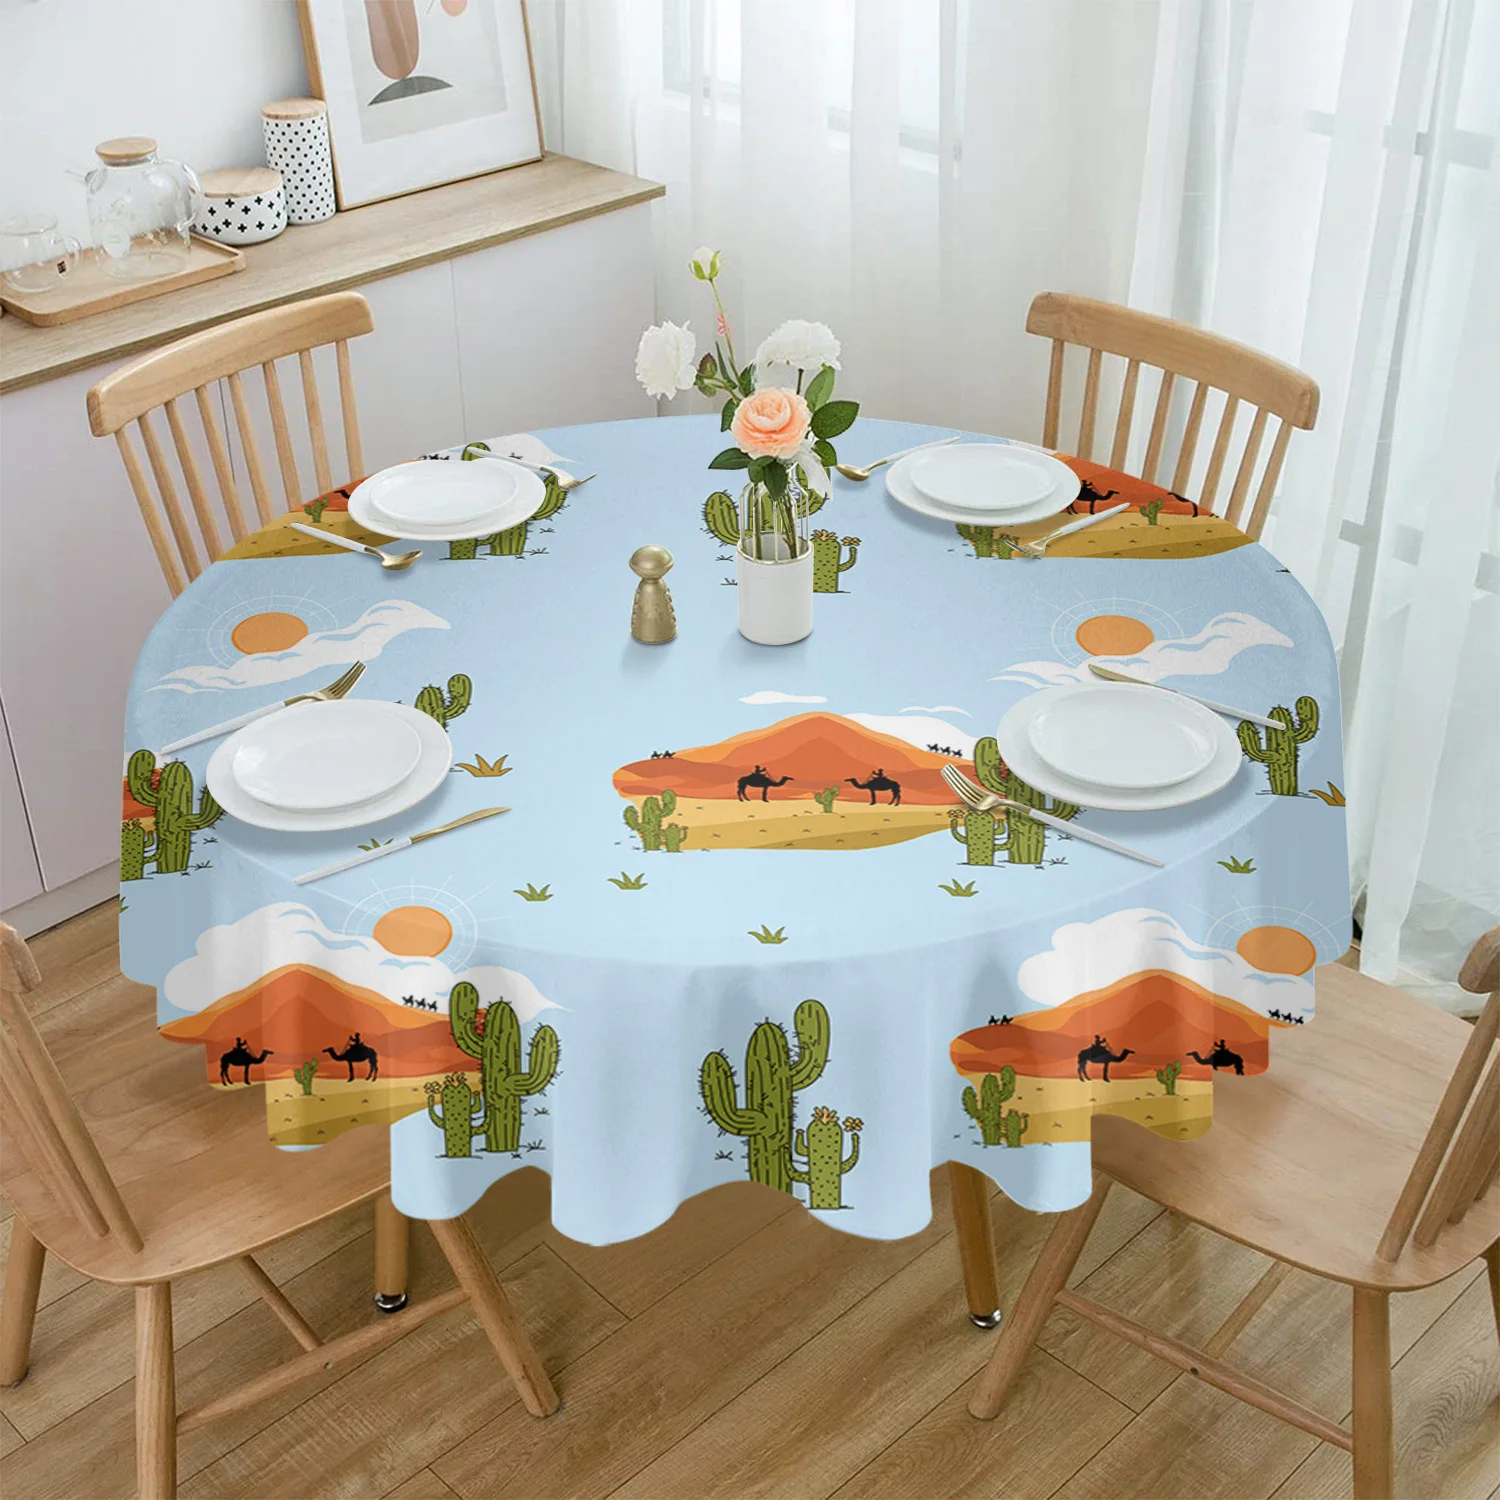 

Hand-Painted Desert Camel Cactus Clouds Round Tablecloth Waterproof Table Cover for Wedding Party Decoration Dining Table Cover